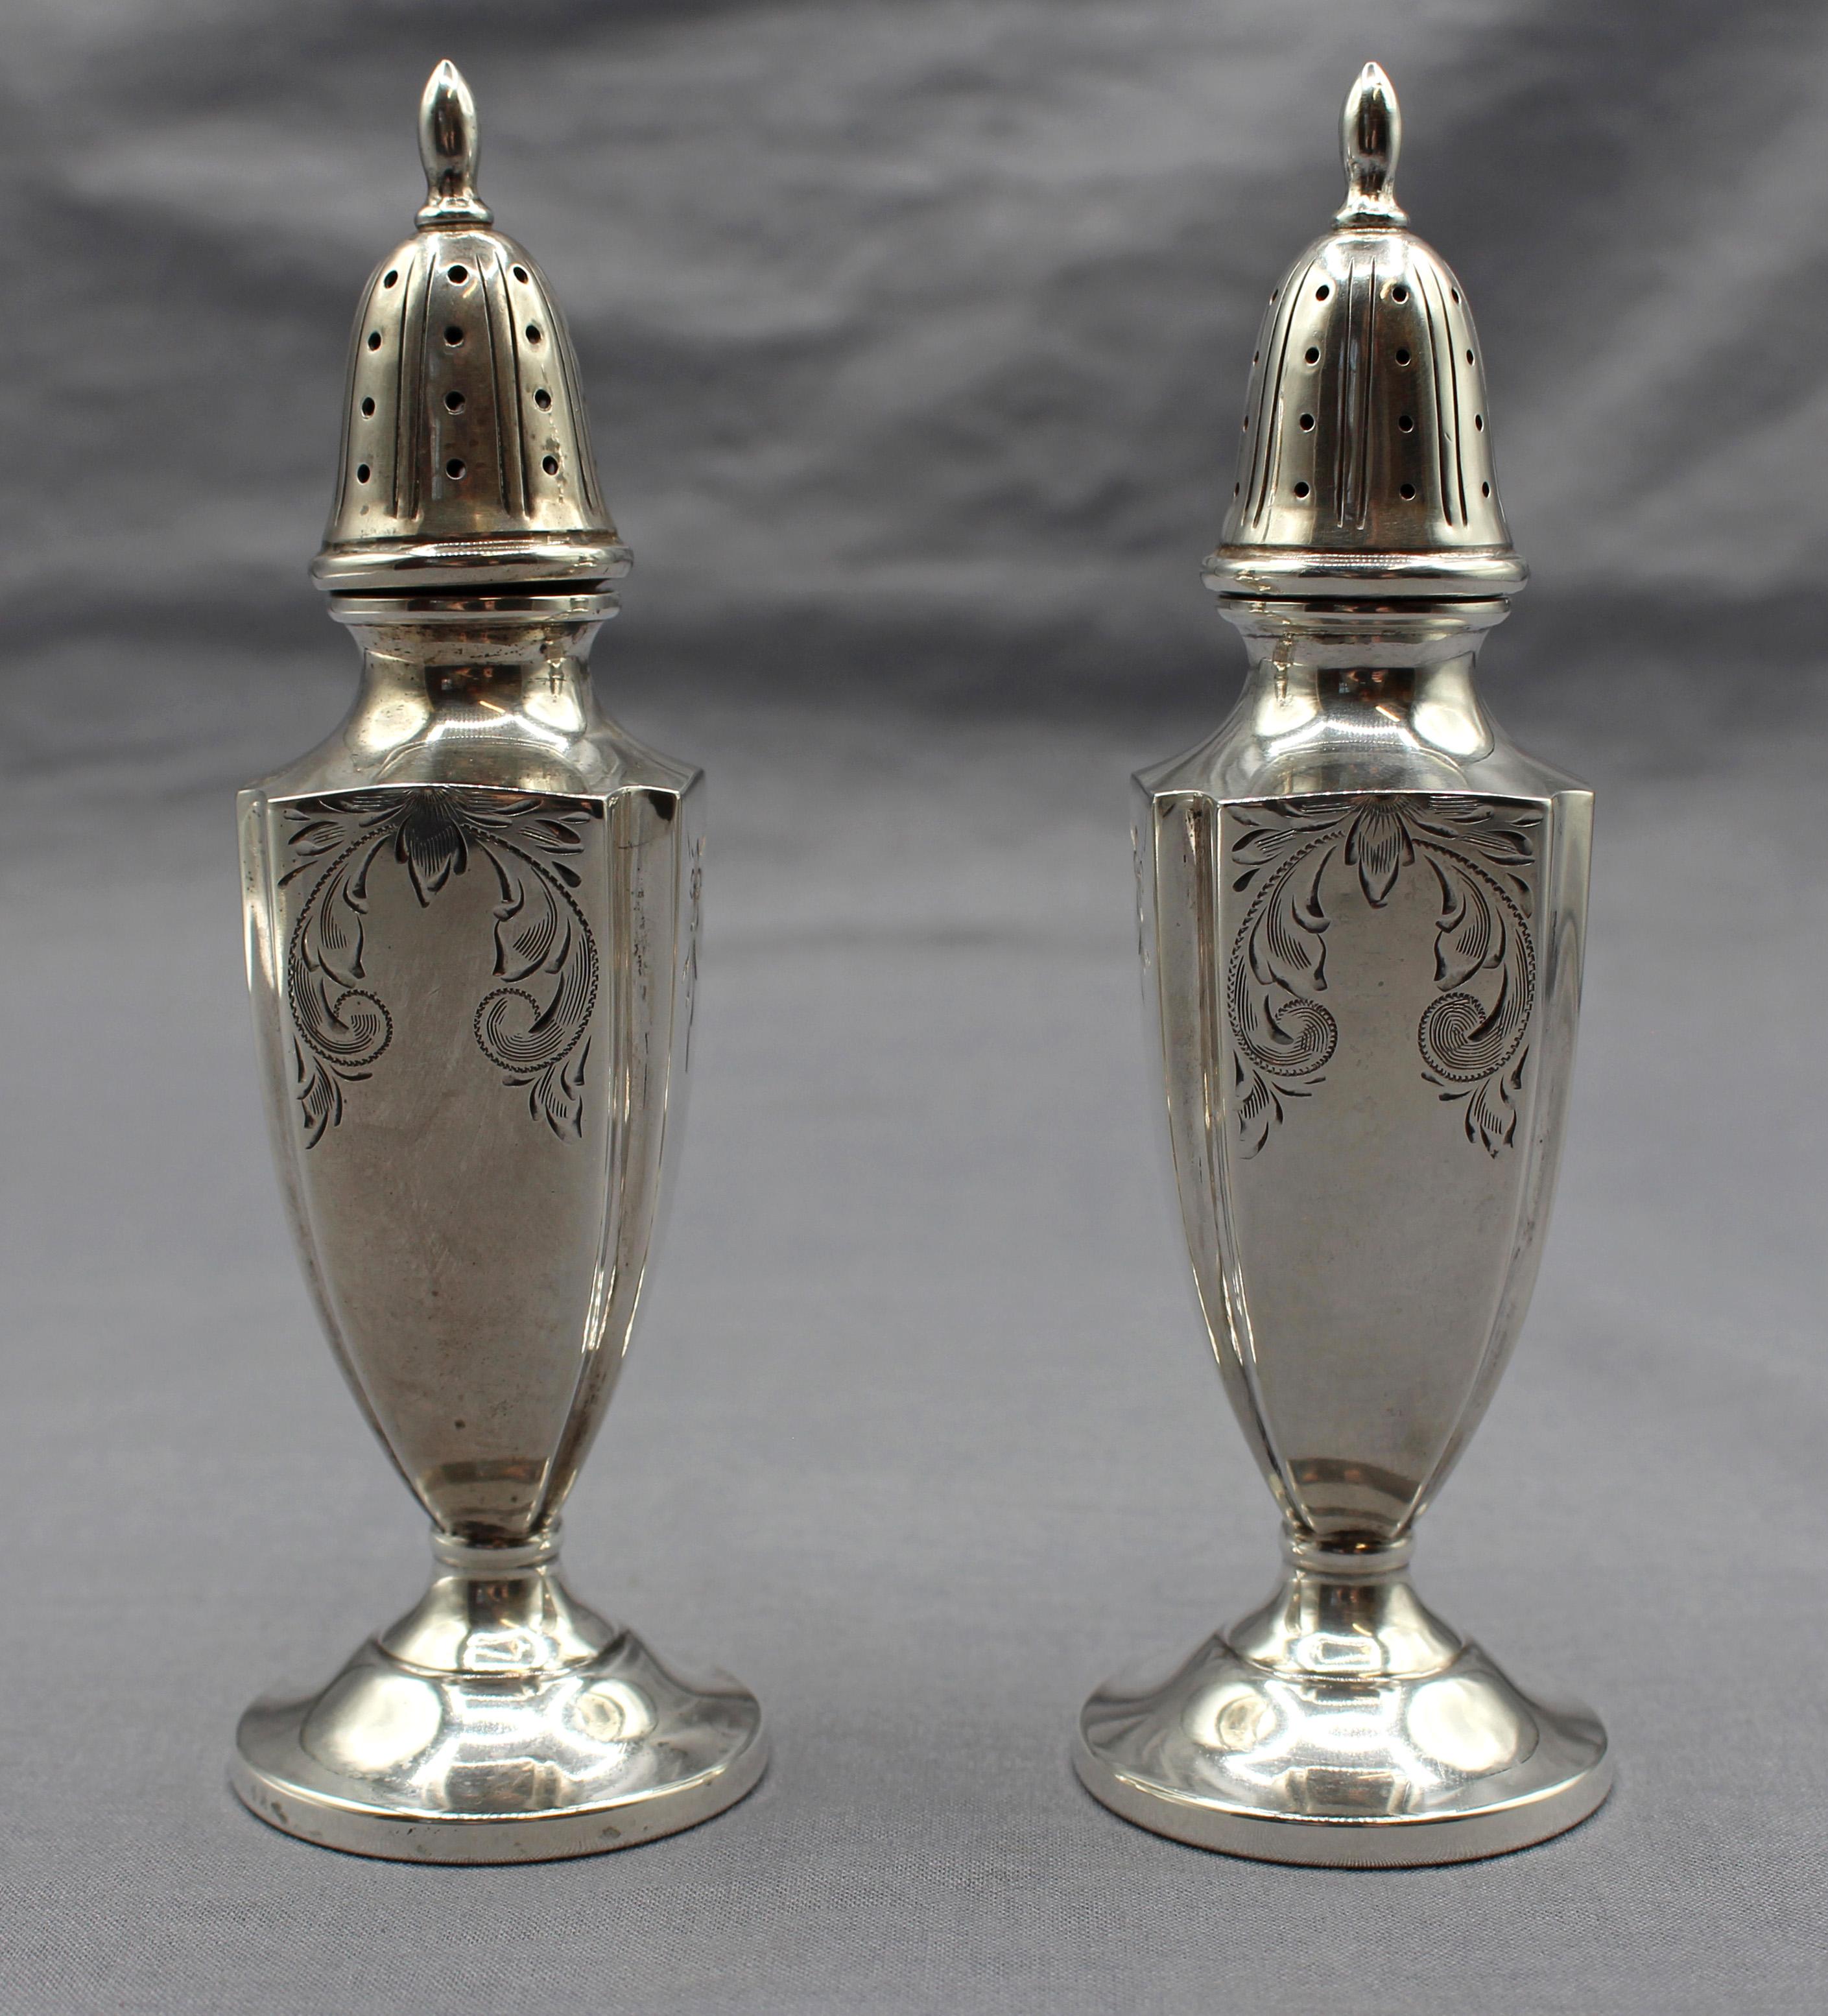 Vintage pair of sterling silver salt & pepper casters, Fisher Company, pattern 419. Neoclassical style. Never engraved. Bright cut designs. 3.10 troy ounces.

Measures: 5 1/2